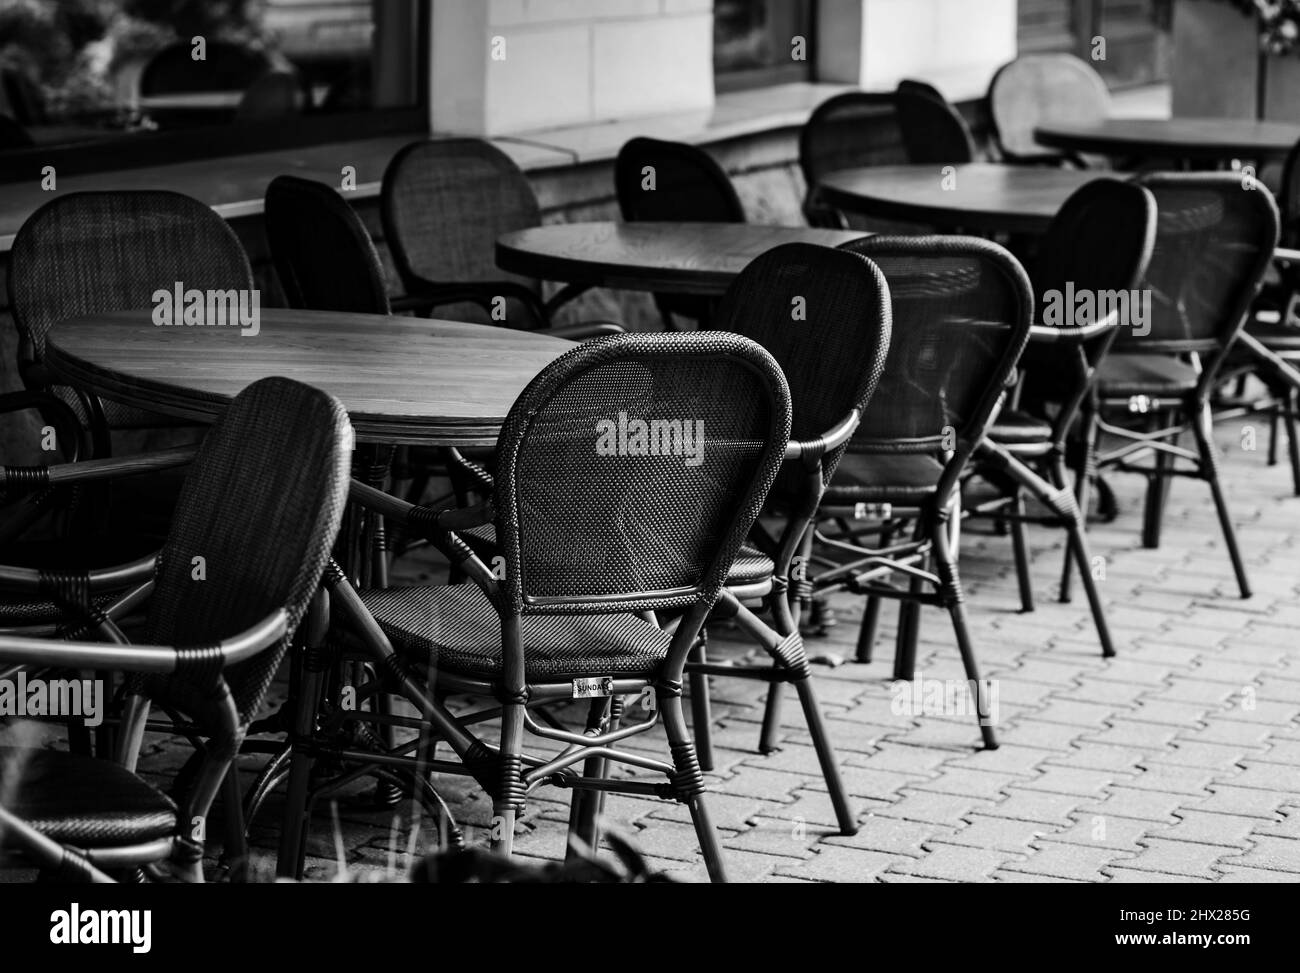 city cafe in the center with empty tables and chairs Stock Photo